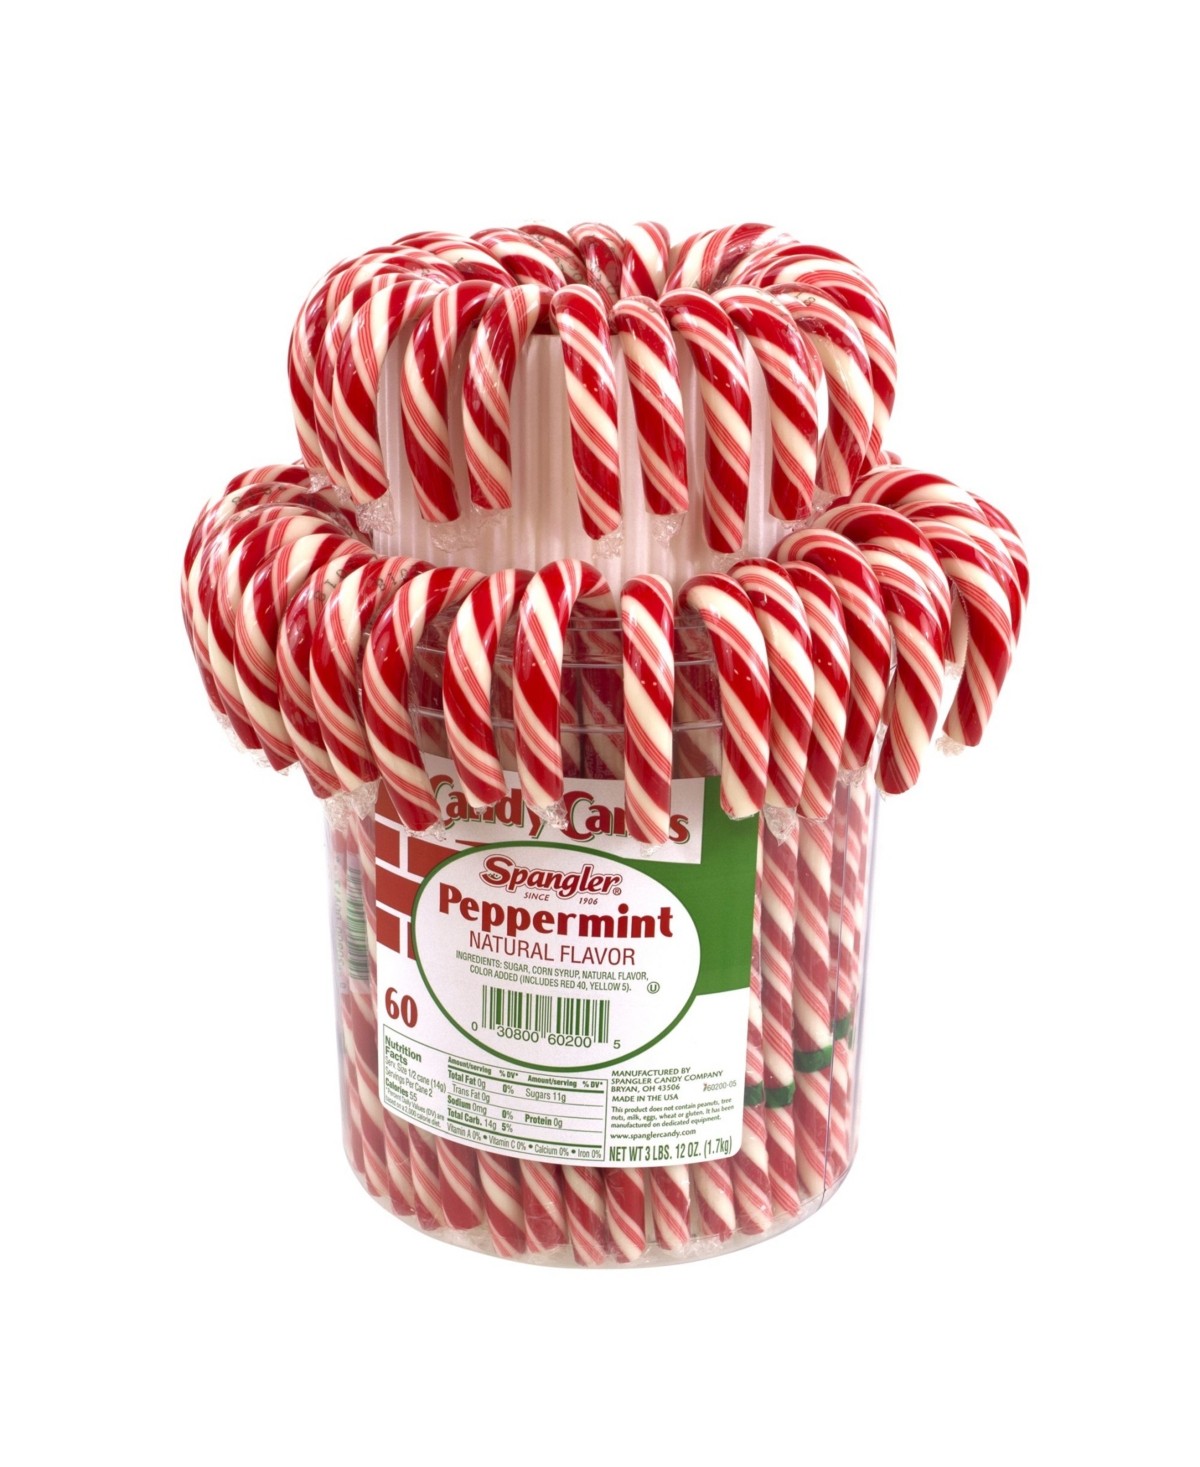 Peppermint Candy Canes, 1 oz, 60-Piece, 3.75 lb Jar, Delivered in 1-4 Business Days